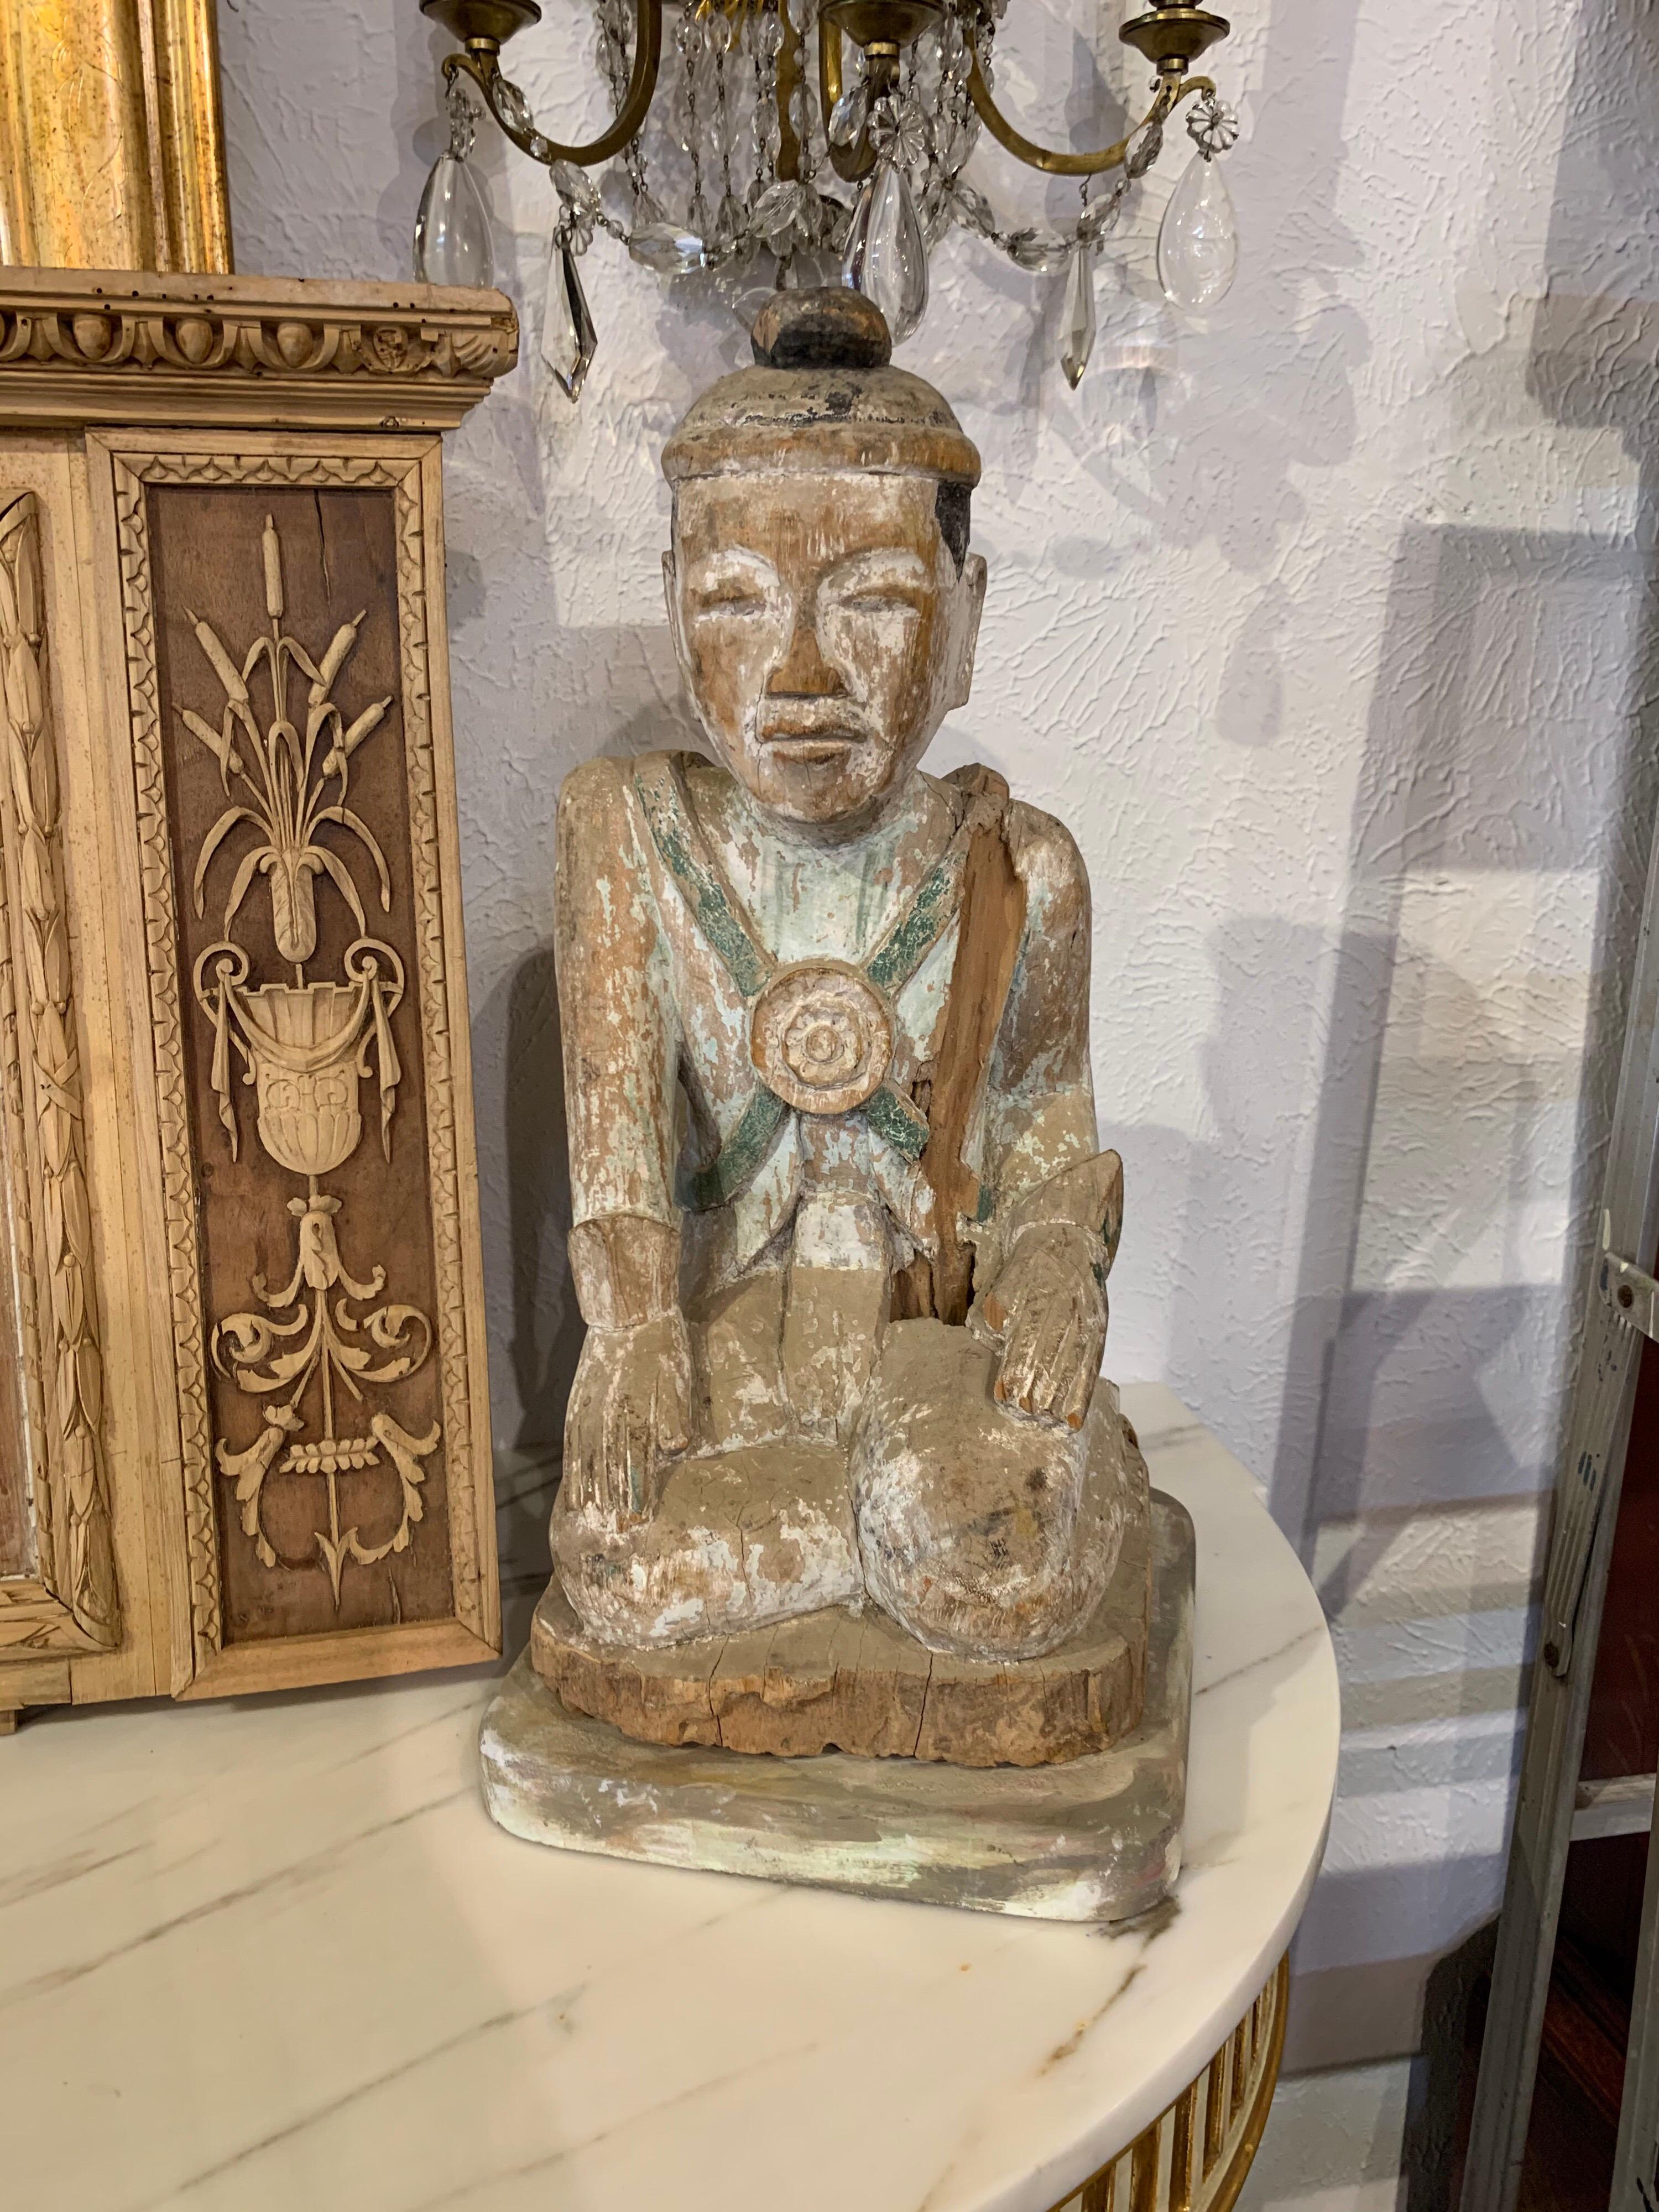 Lovely pair of 19th century French carved and painted oriental figures. Very fine carving and patina on these. Such interesting decorative accent pieces!